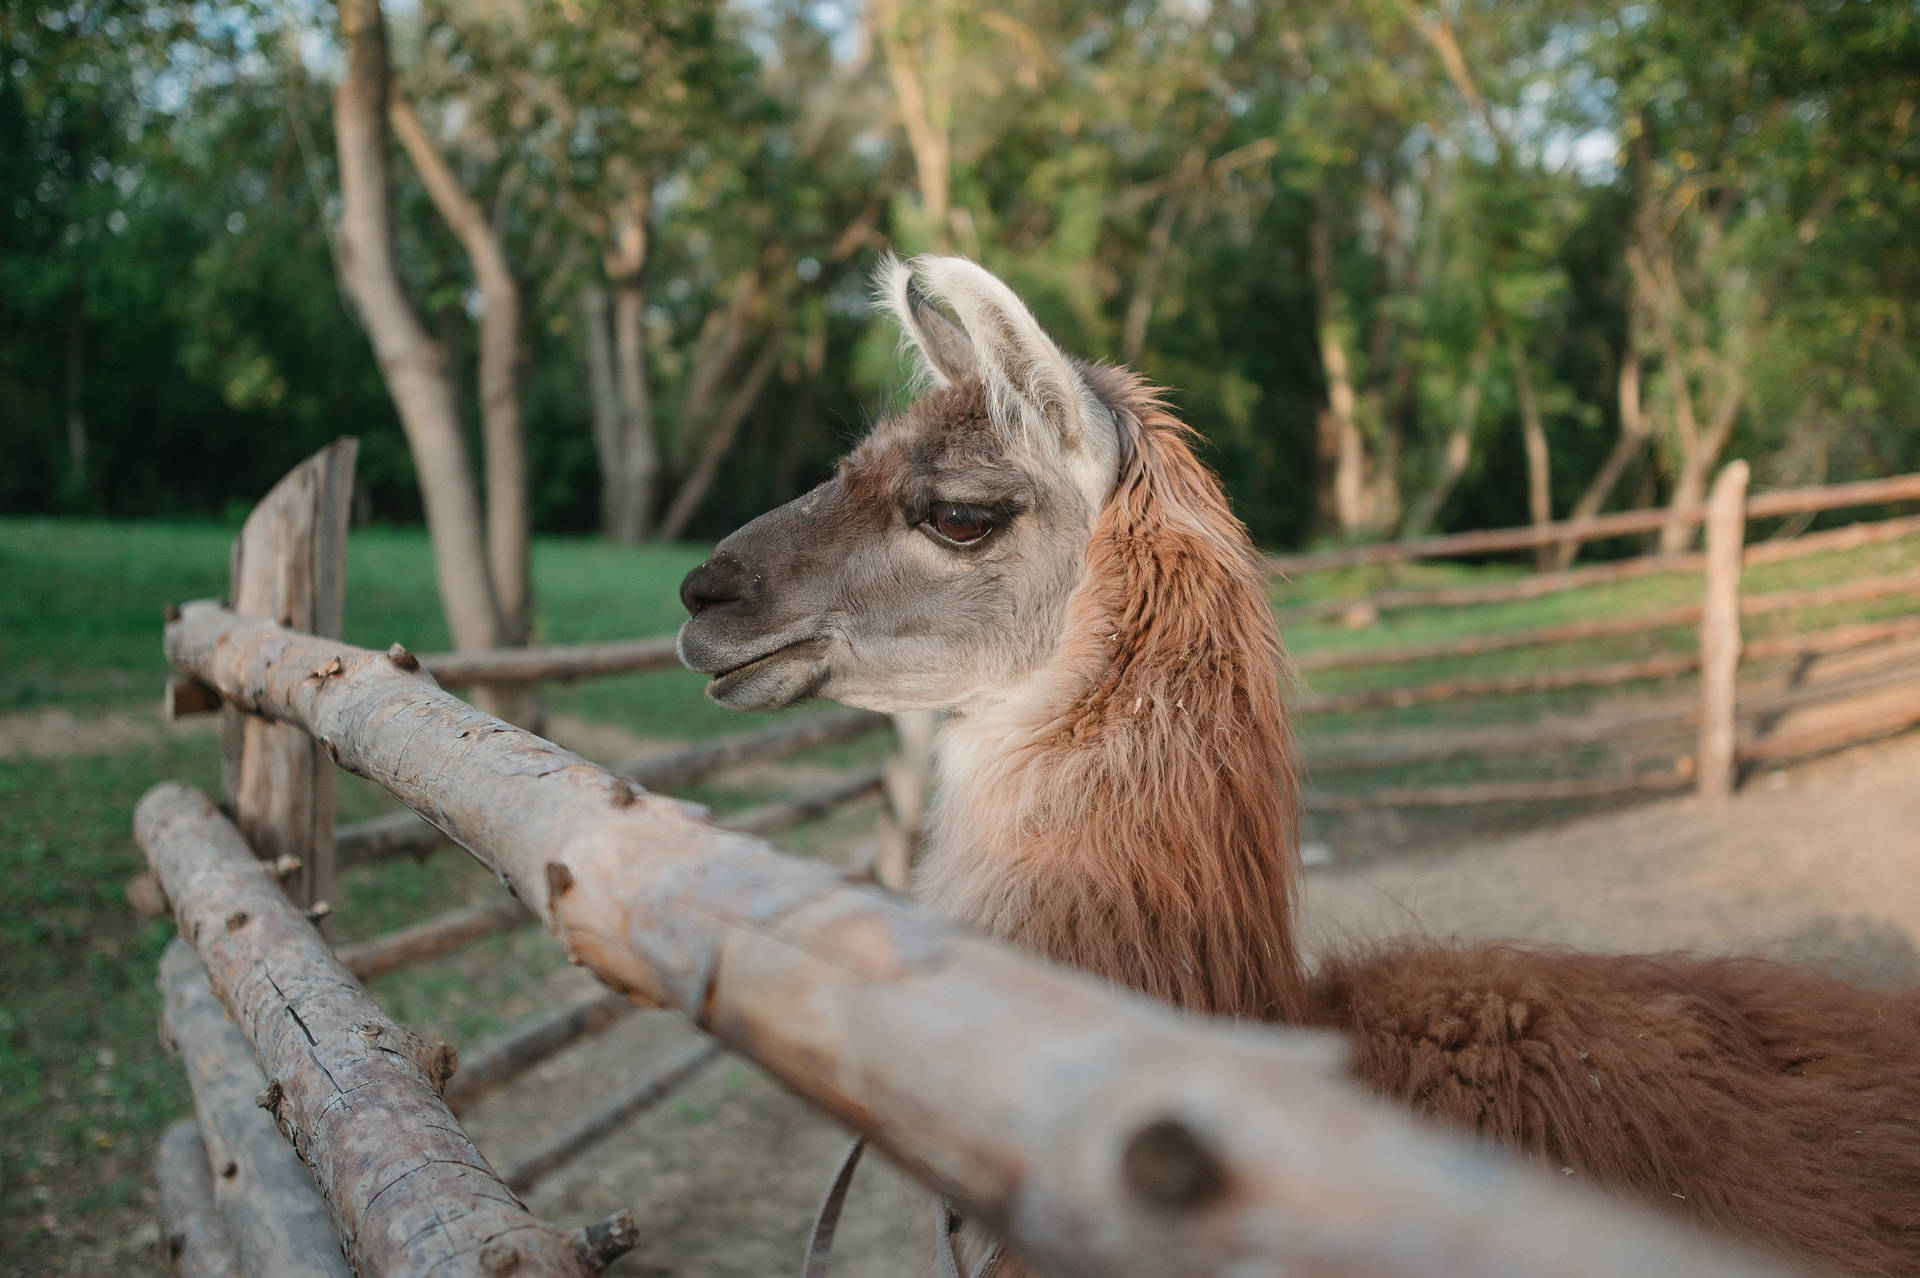 Alpaca By A Wooden Fence